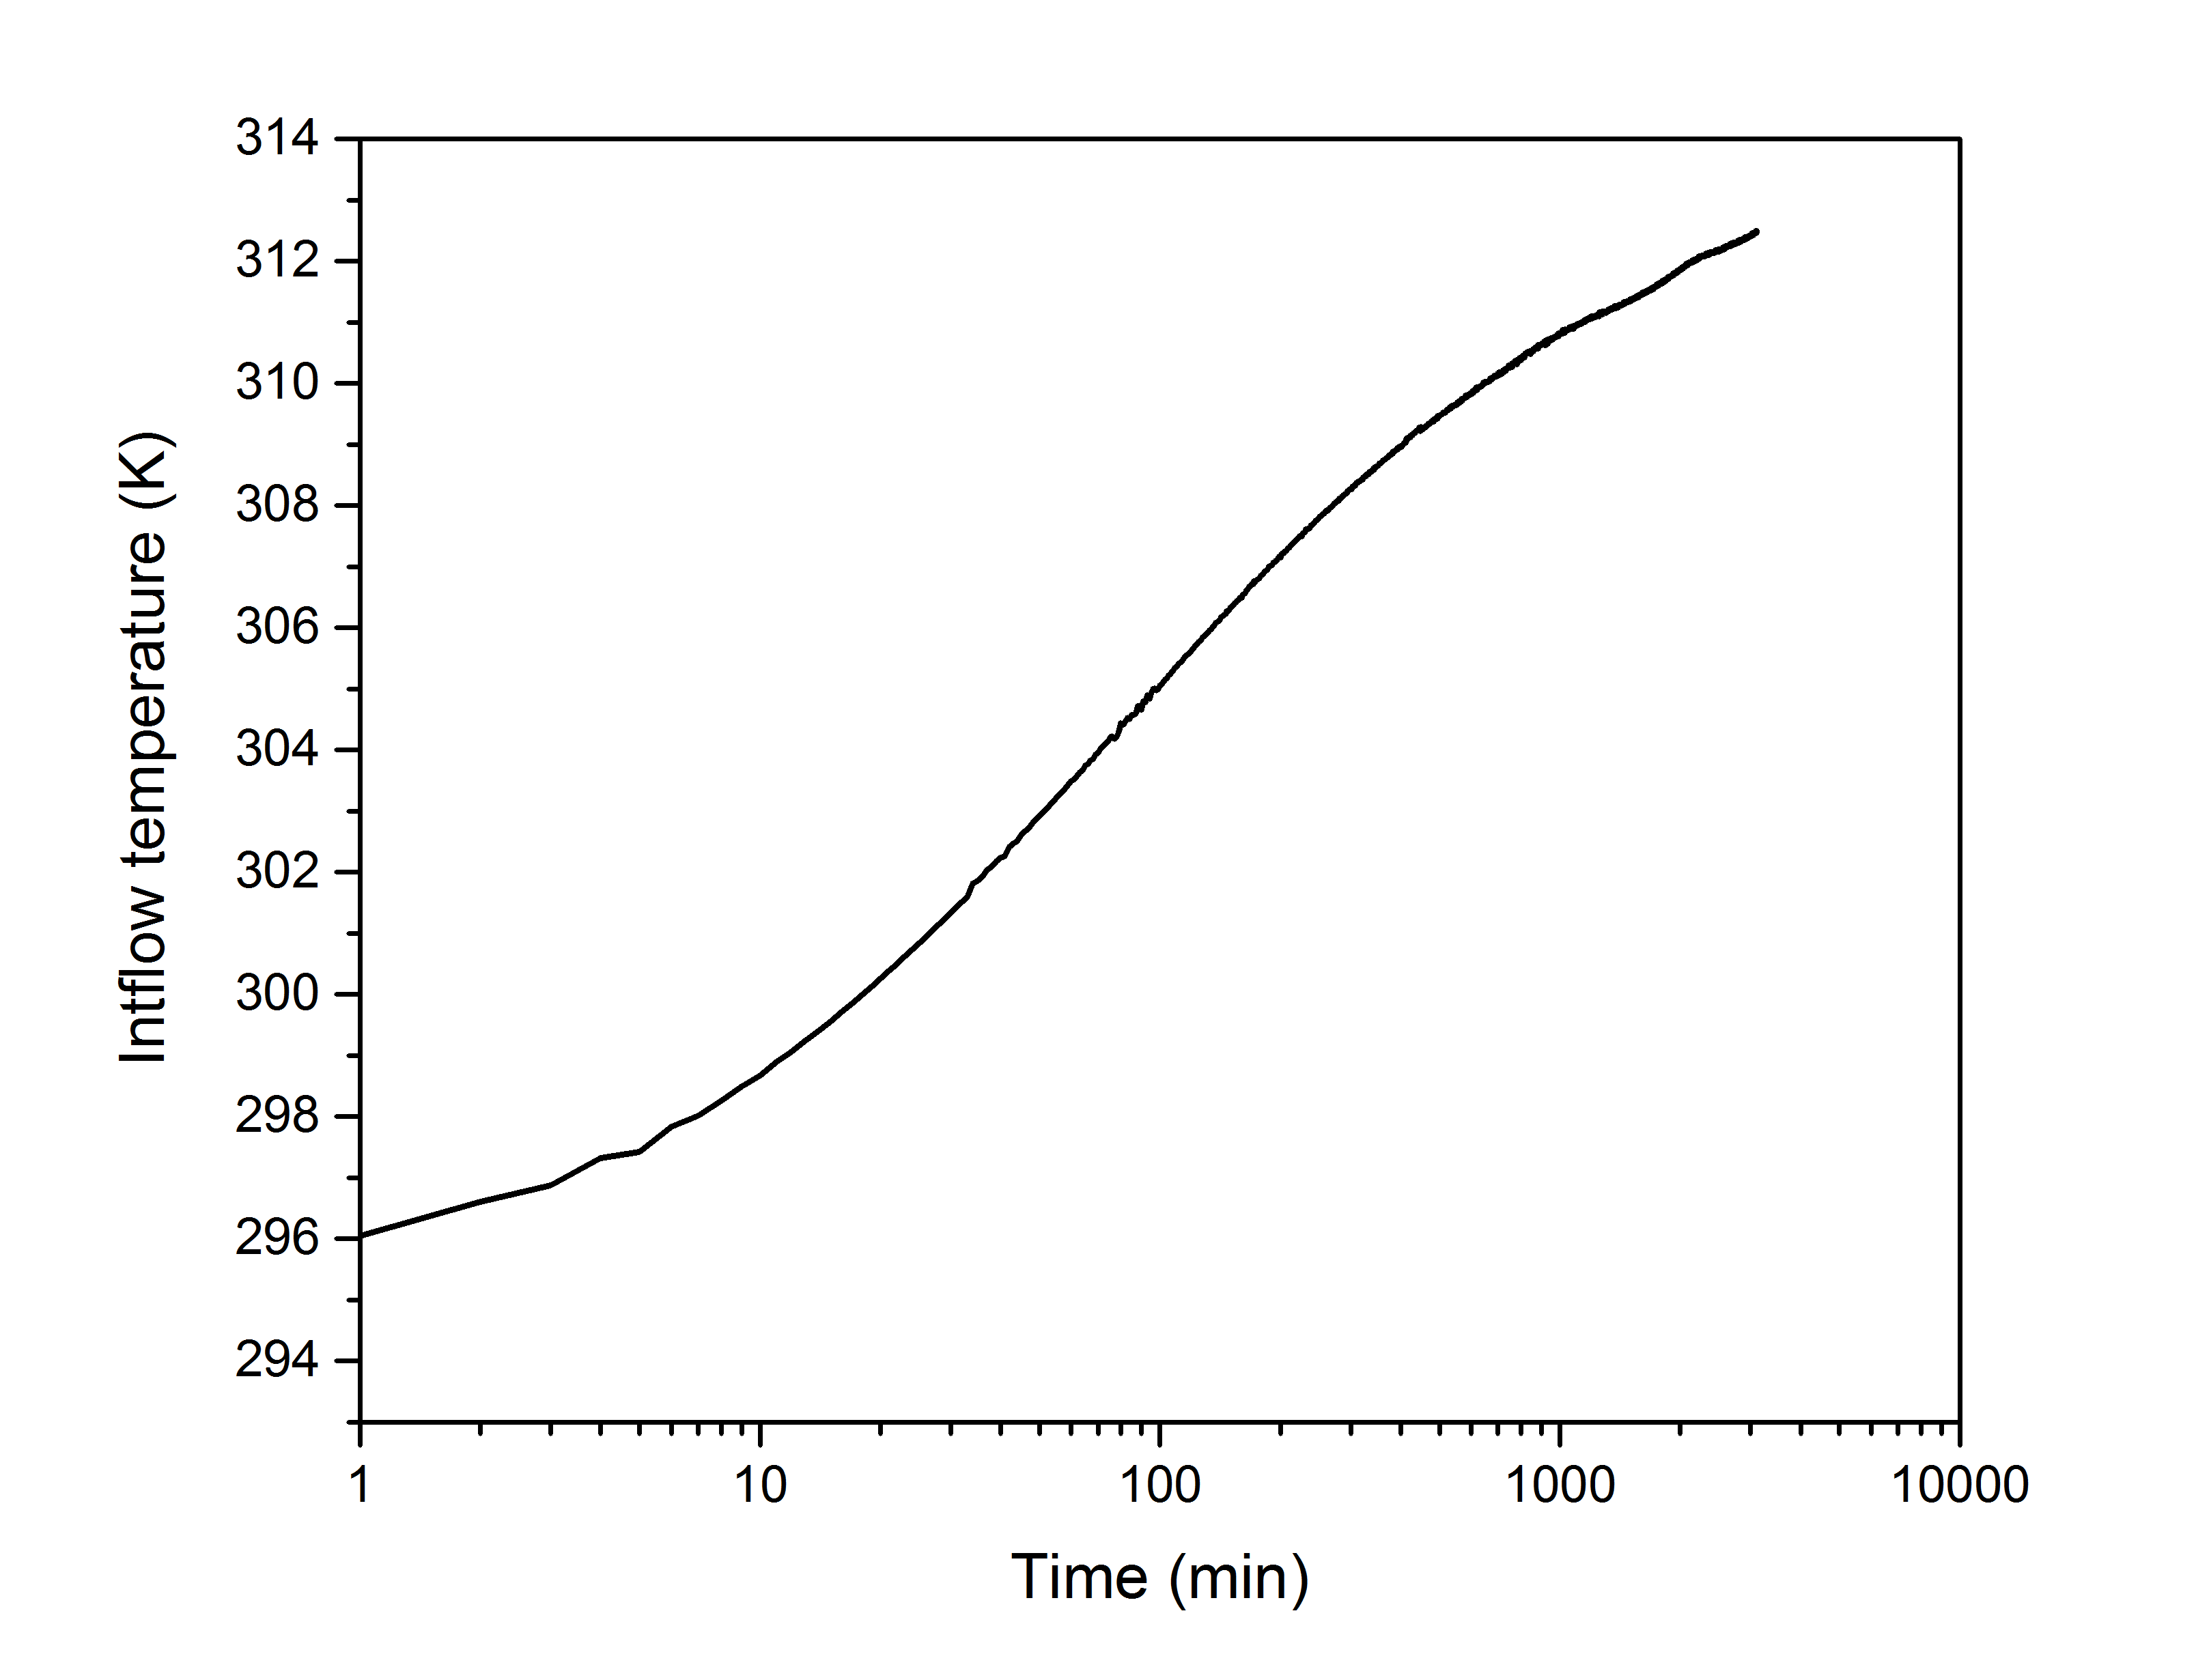 Inflow temperature curve as the BHE boundary condition